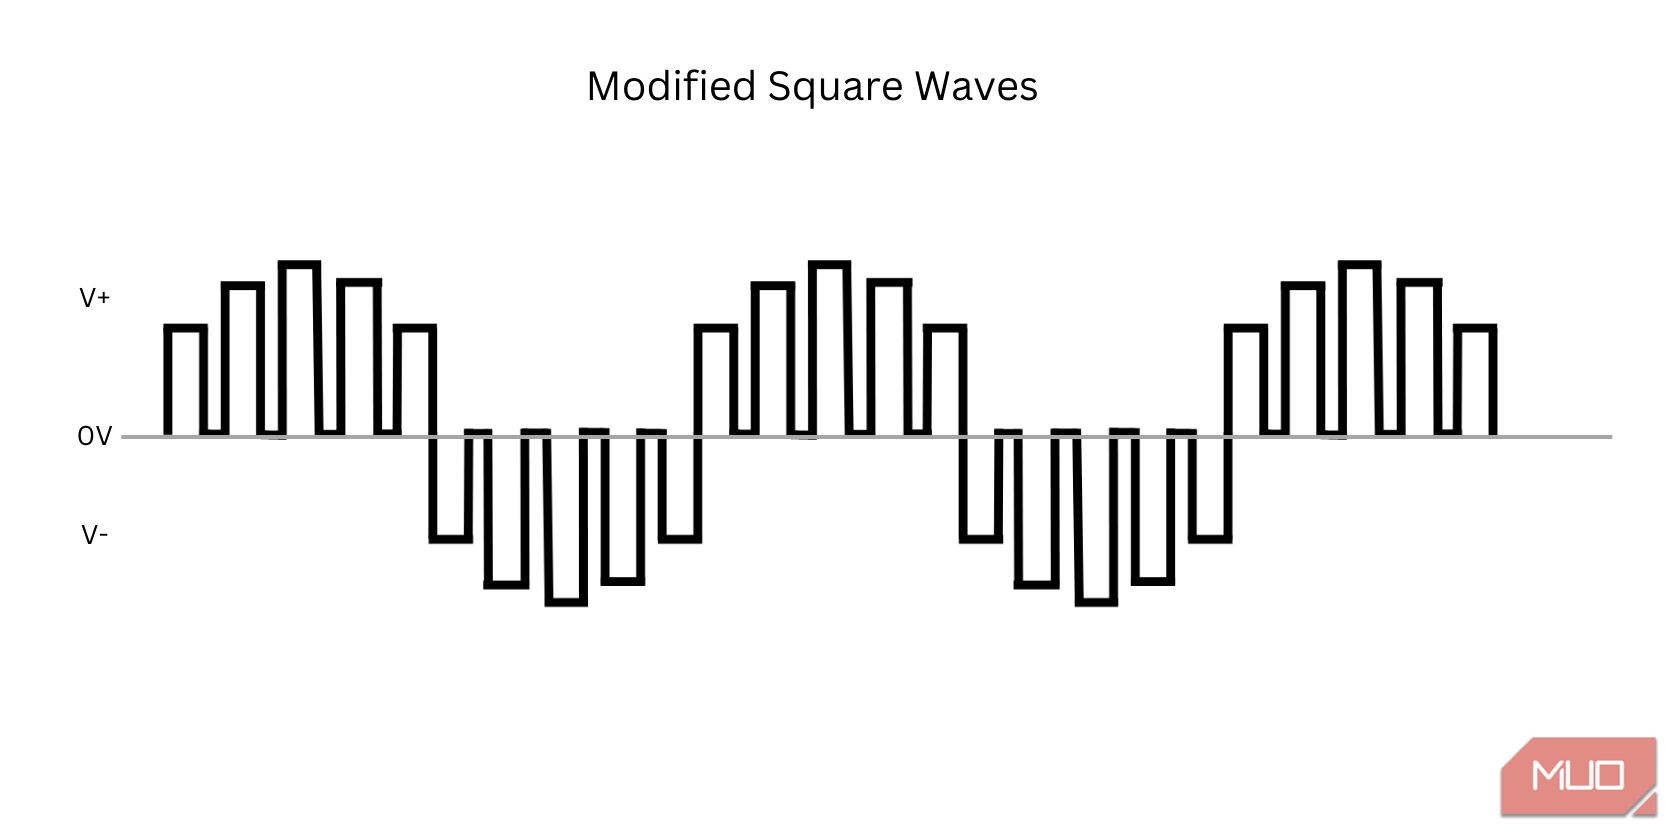 Modified square waves